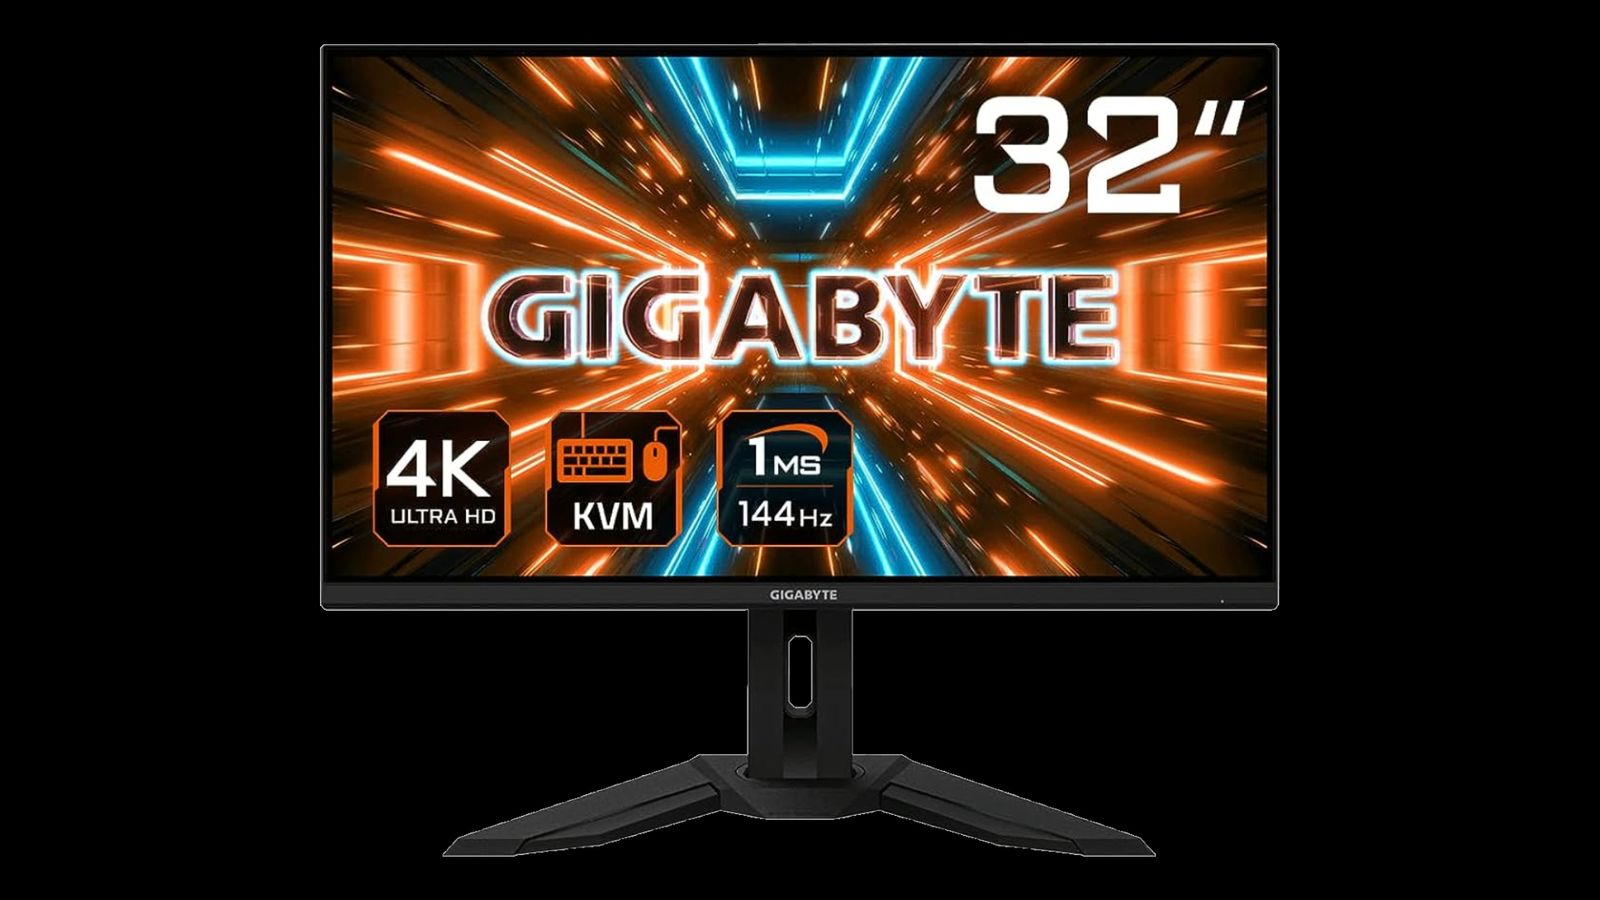 Gigabyte M32U product image of a black monitor with Gigabyte branding surrounded by orange and blue lights on the display.